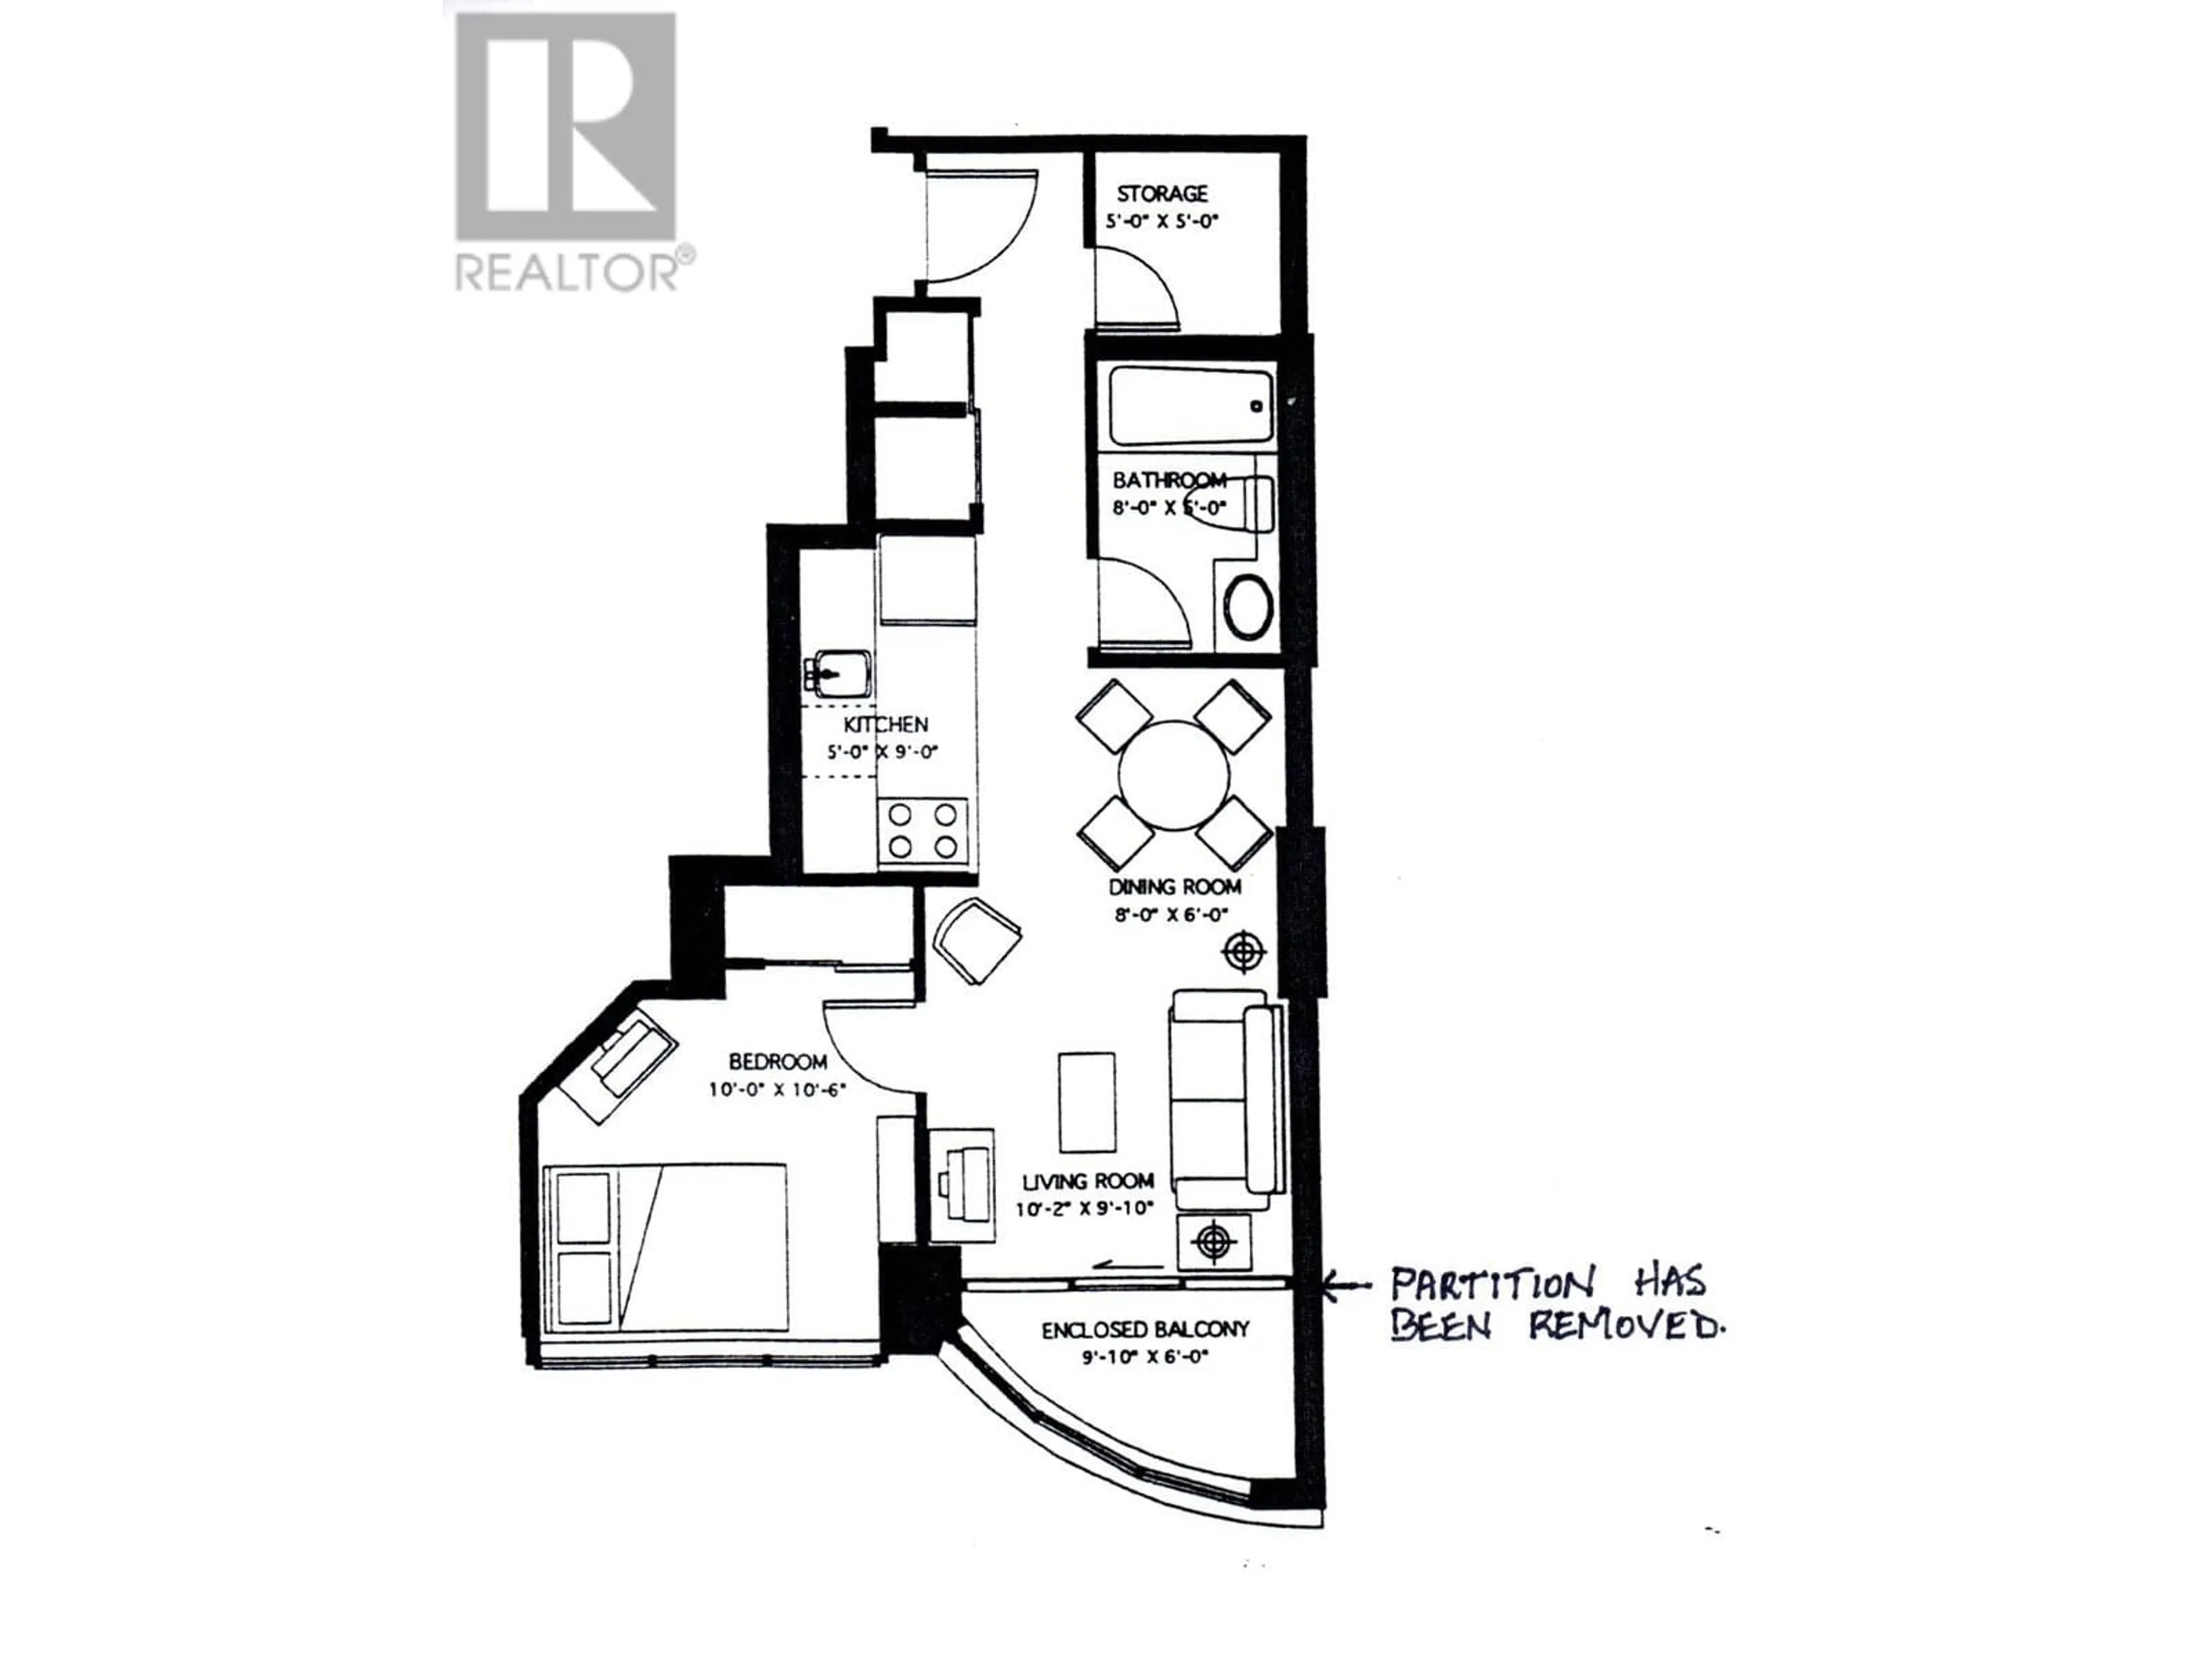 Floor plan for 1407 555 JERVIS STREET, Vancouver British Columbia V6E4N1